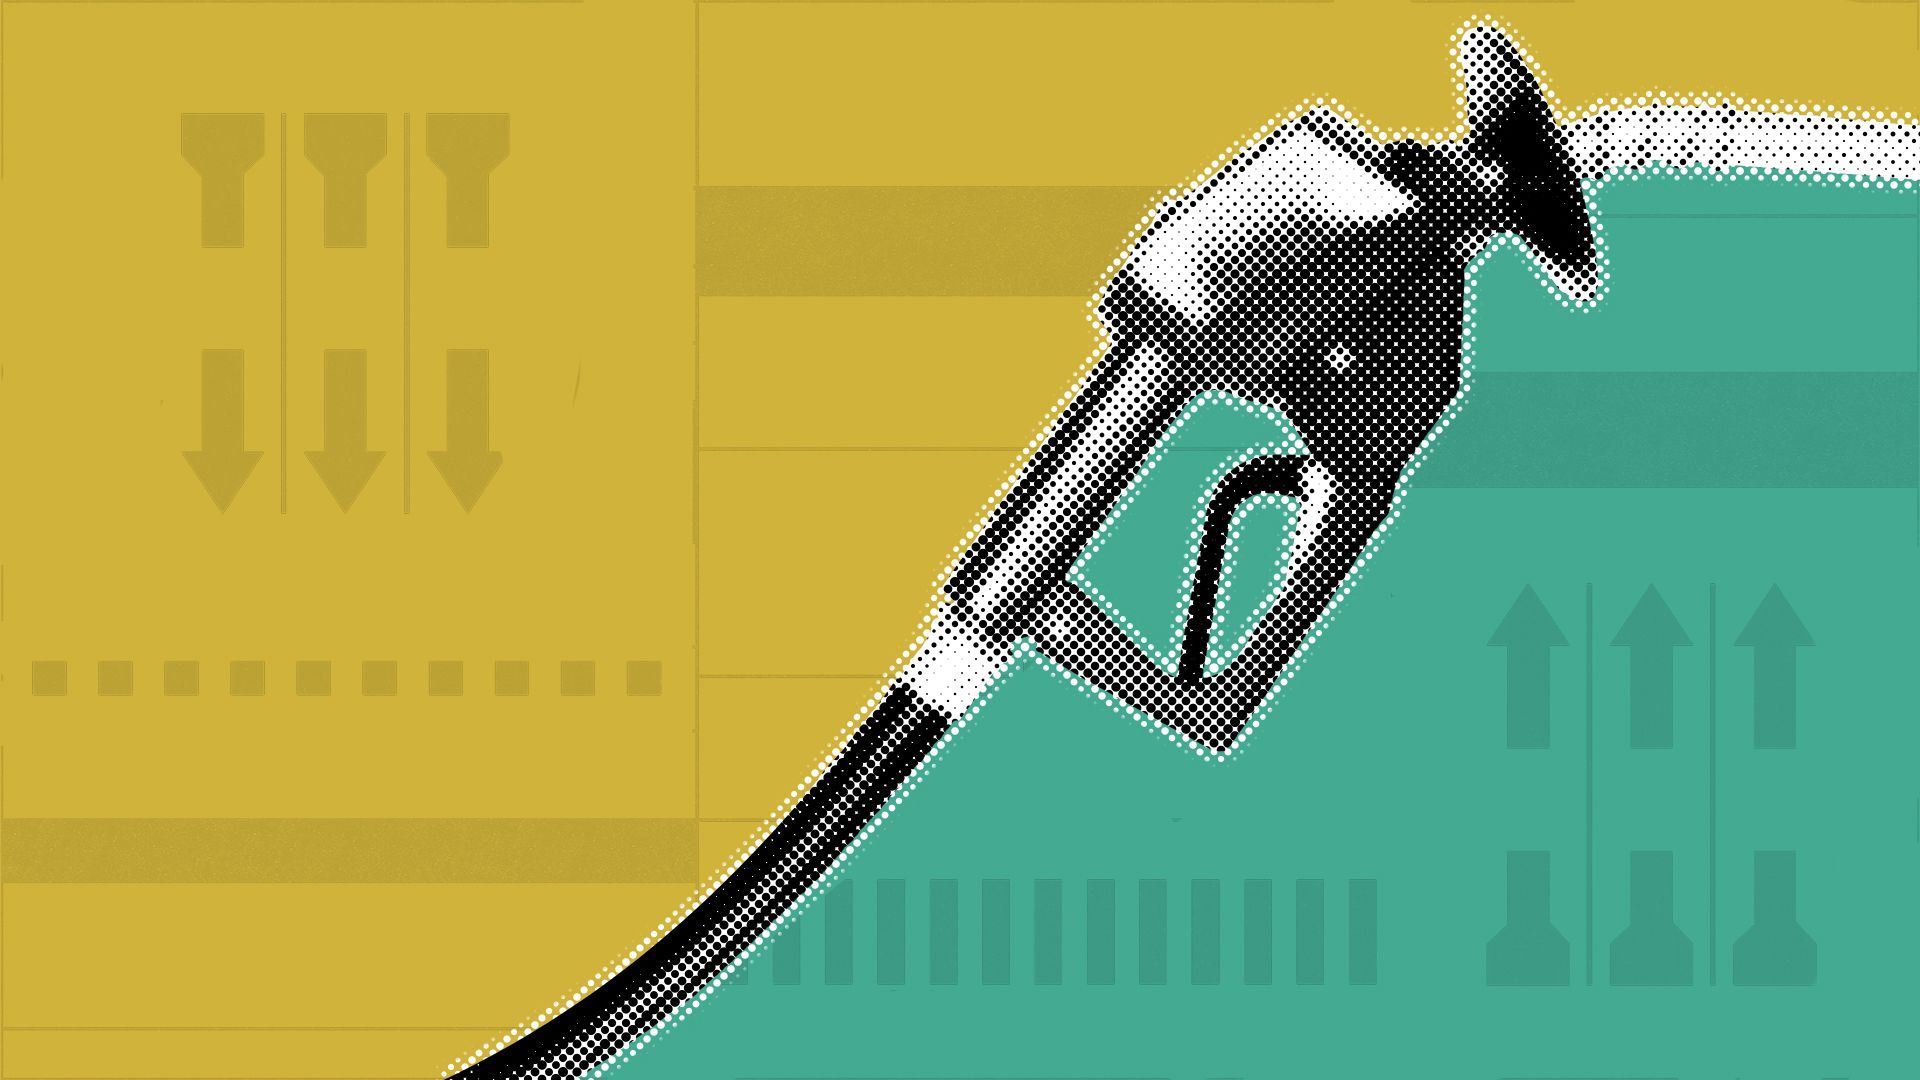 Illustration of a gas pump nozzle separating color blocks of green and yellow, with elements of ballots behind it.